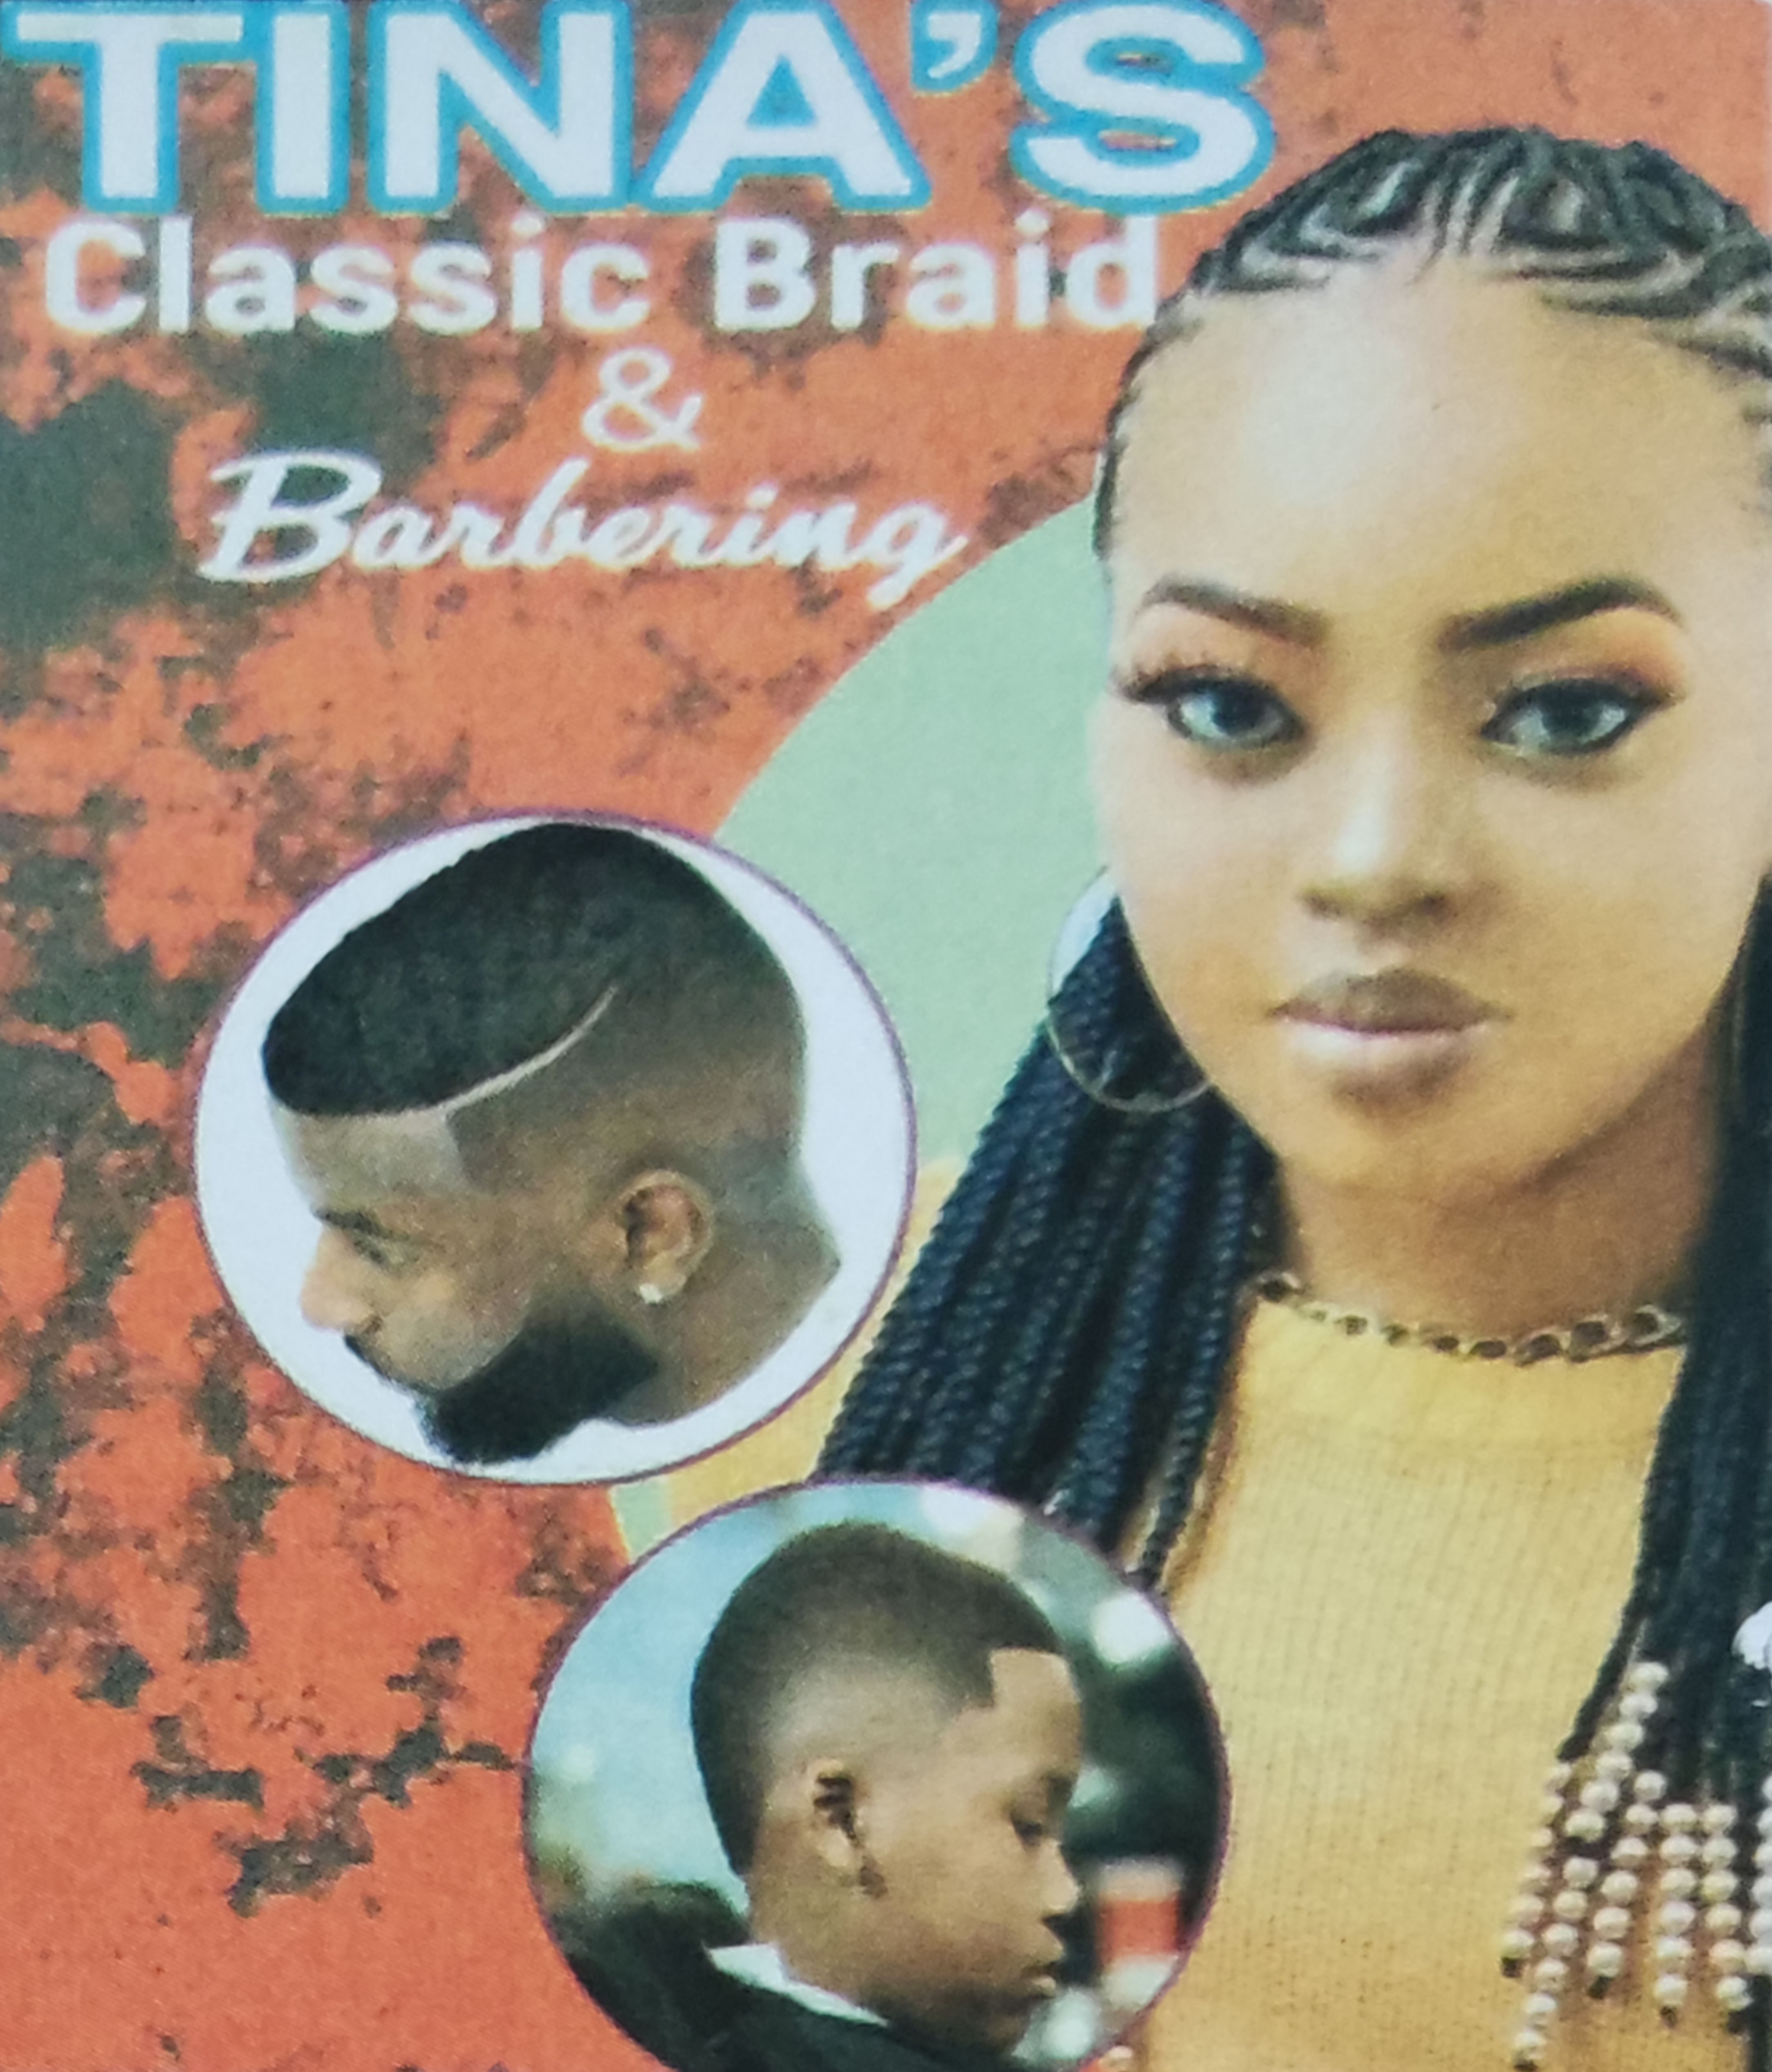 Tinas Classic Braid and Barbering 2